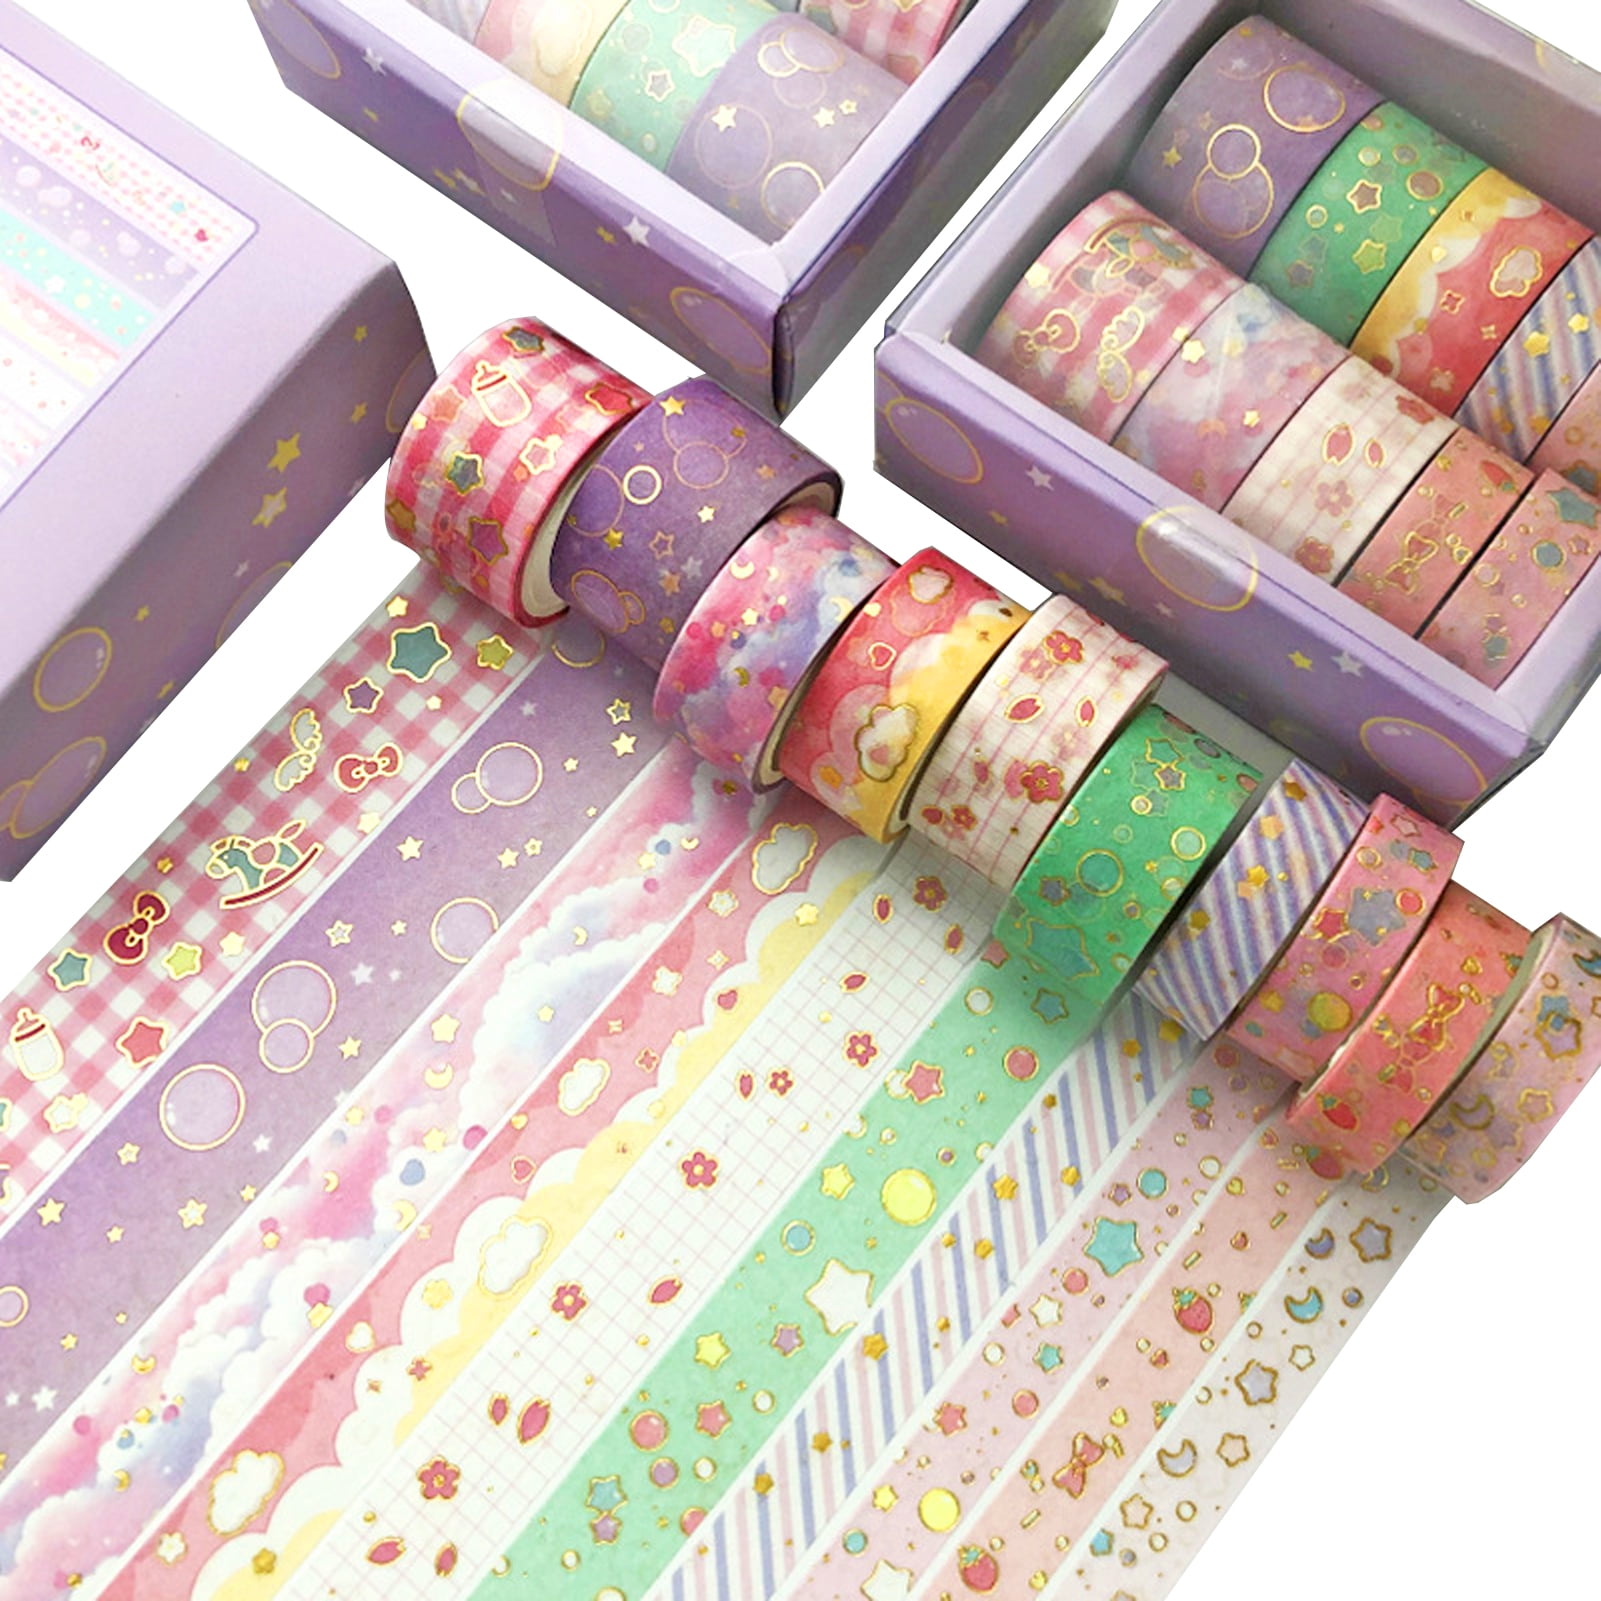 Yesbay 10 Rolls Washi Tape Set Foil Floral Decorative Masking Paper Sticker  for Craft Scrapbook Journal DIY Gift Wrapping 